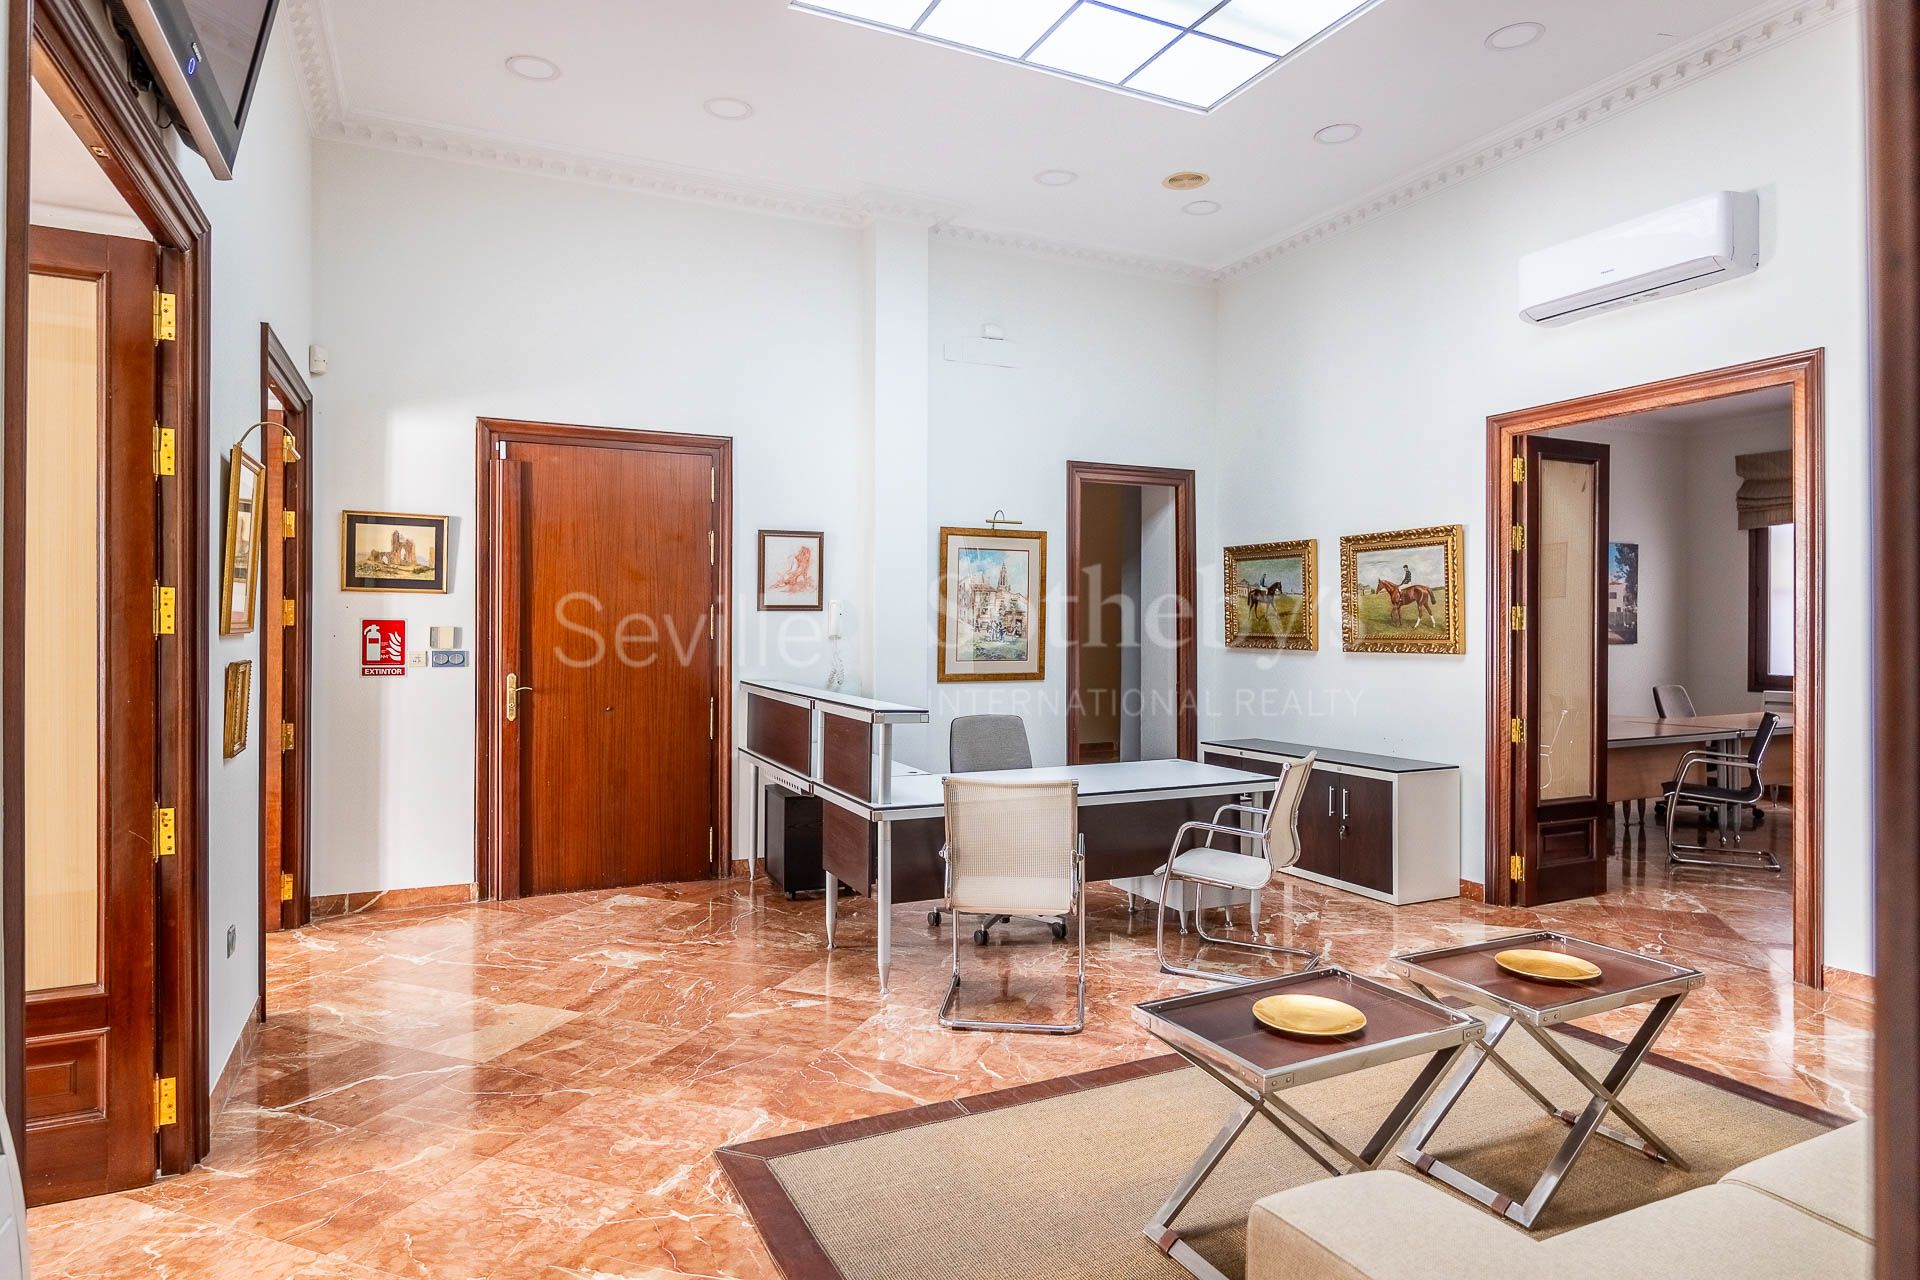 The property is located in the centre of Seville with prominent balconies facing Zaragoza Street